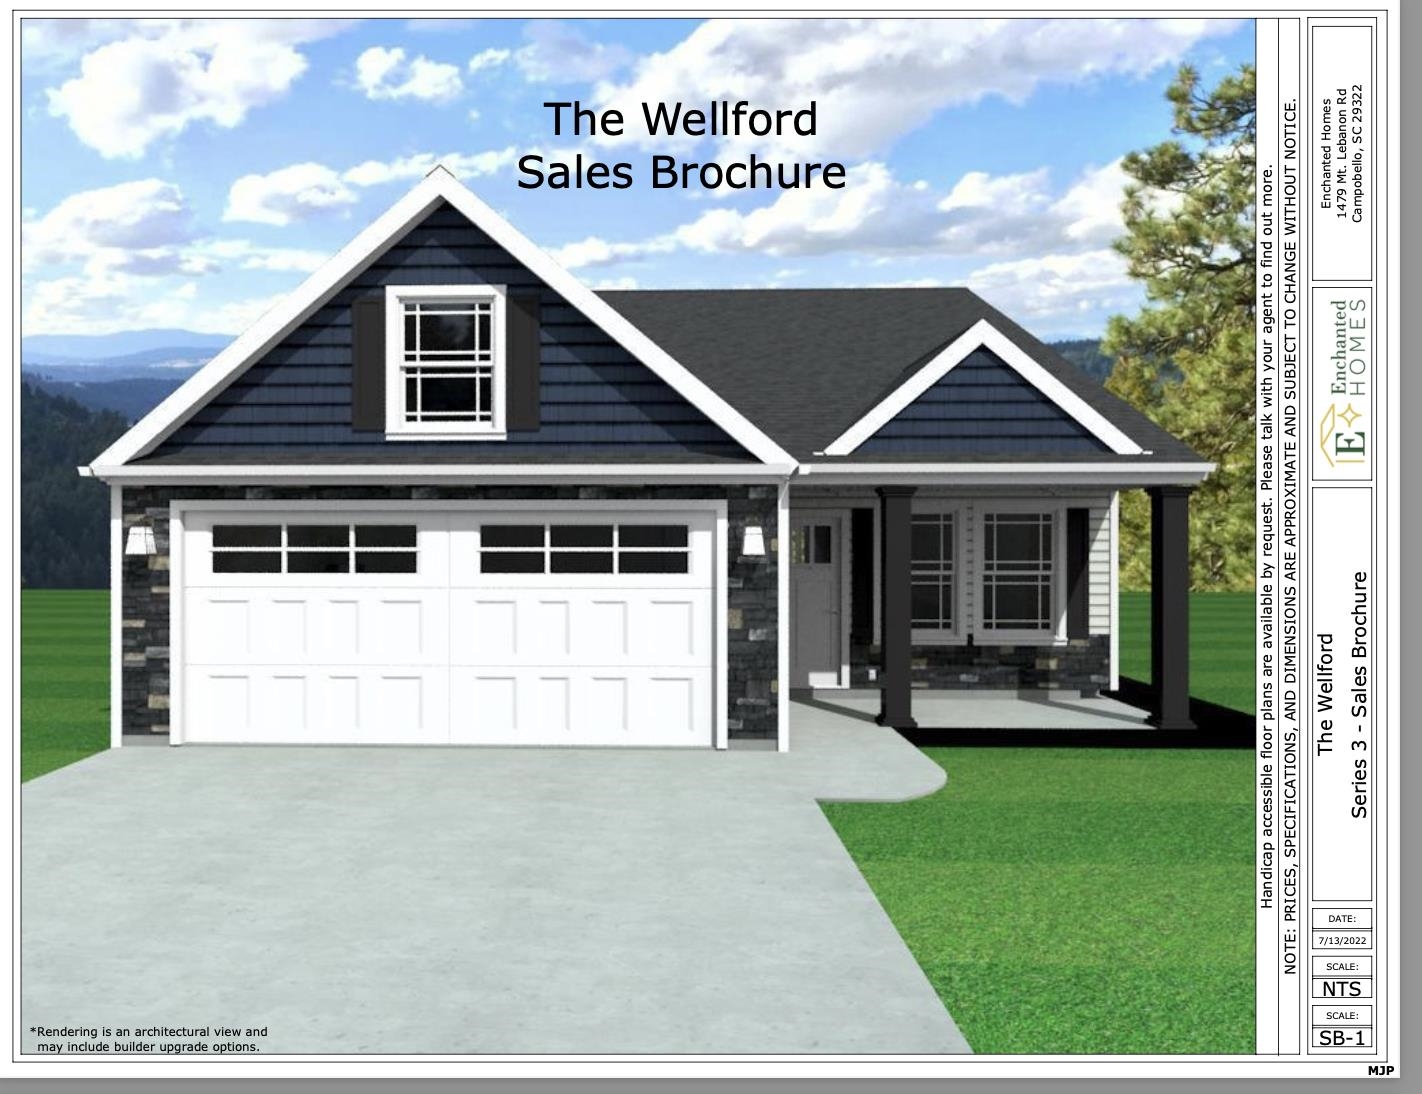 The WELLFORD (Lot 11) offers a modern, open concept living area perfect for entertaining.  3 bedroom, 2 bath. Complete with the trademark chair rail, crown molding, and rope lighting.  12' x 12' covered back patio.  30-year architectural shingles, site-built construction, and a 10 year limited warranty are included to give you peace of mind.  Closing cost or upgrades incentives available when working with a preferred lender and attorney!!